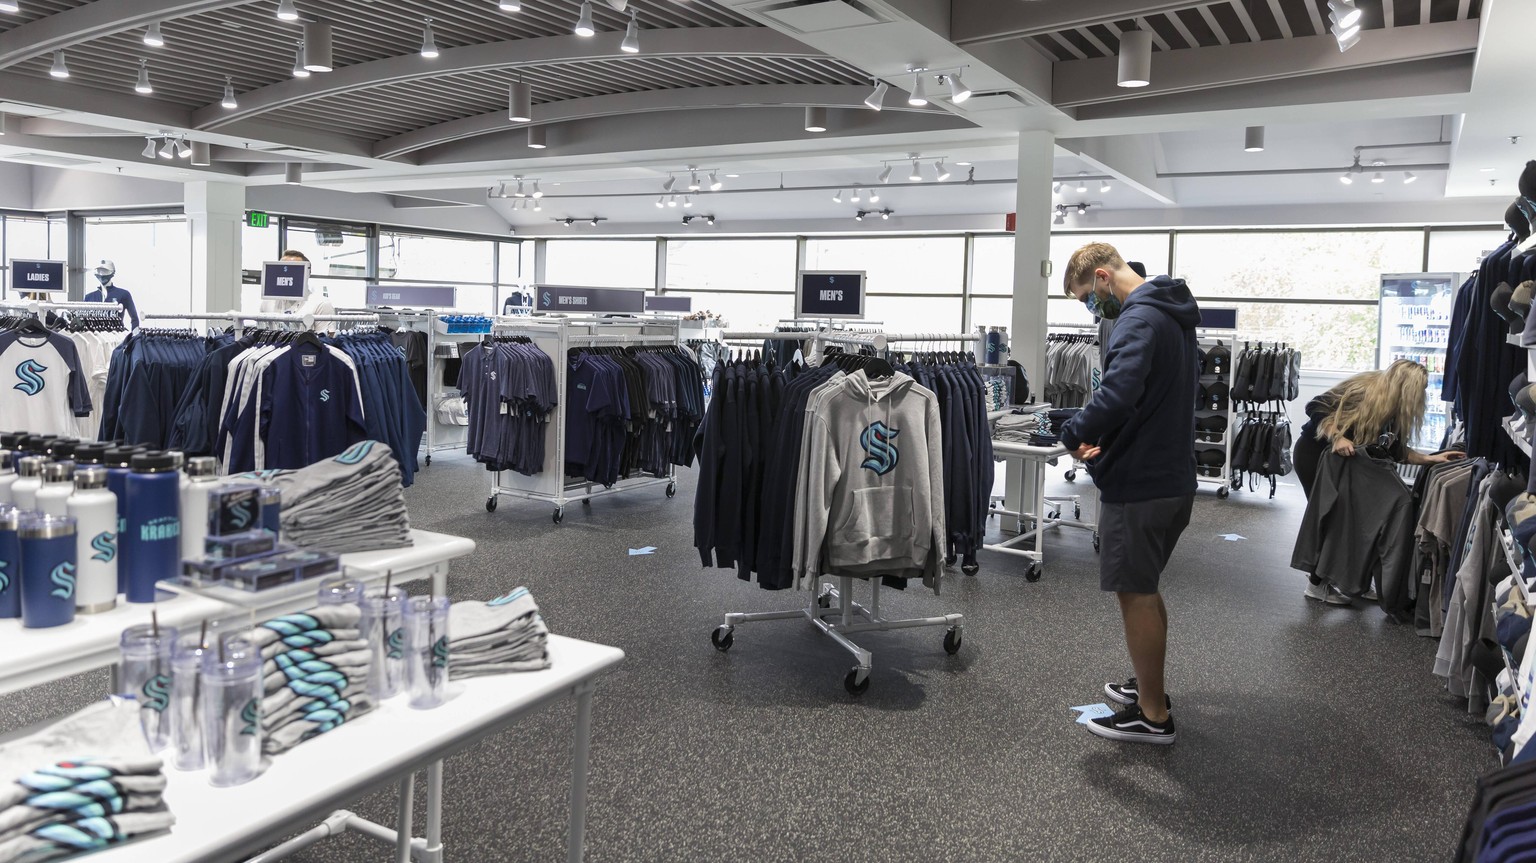 IMAGO / ZUMA Wire

August 21, 2020, Seattle, Washington, USA: Fans shop for team gear during the grand opening of the Seattle Kraken flagship store in Seattle on Friday, August 21, 2020. The store ope ...